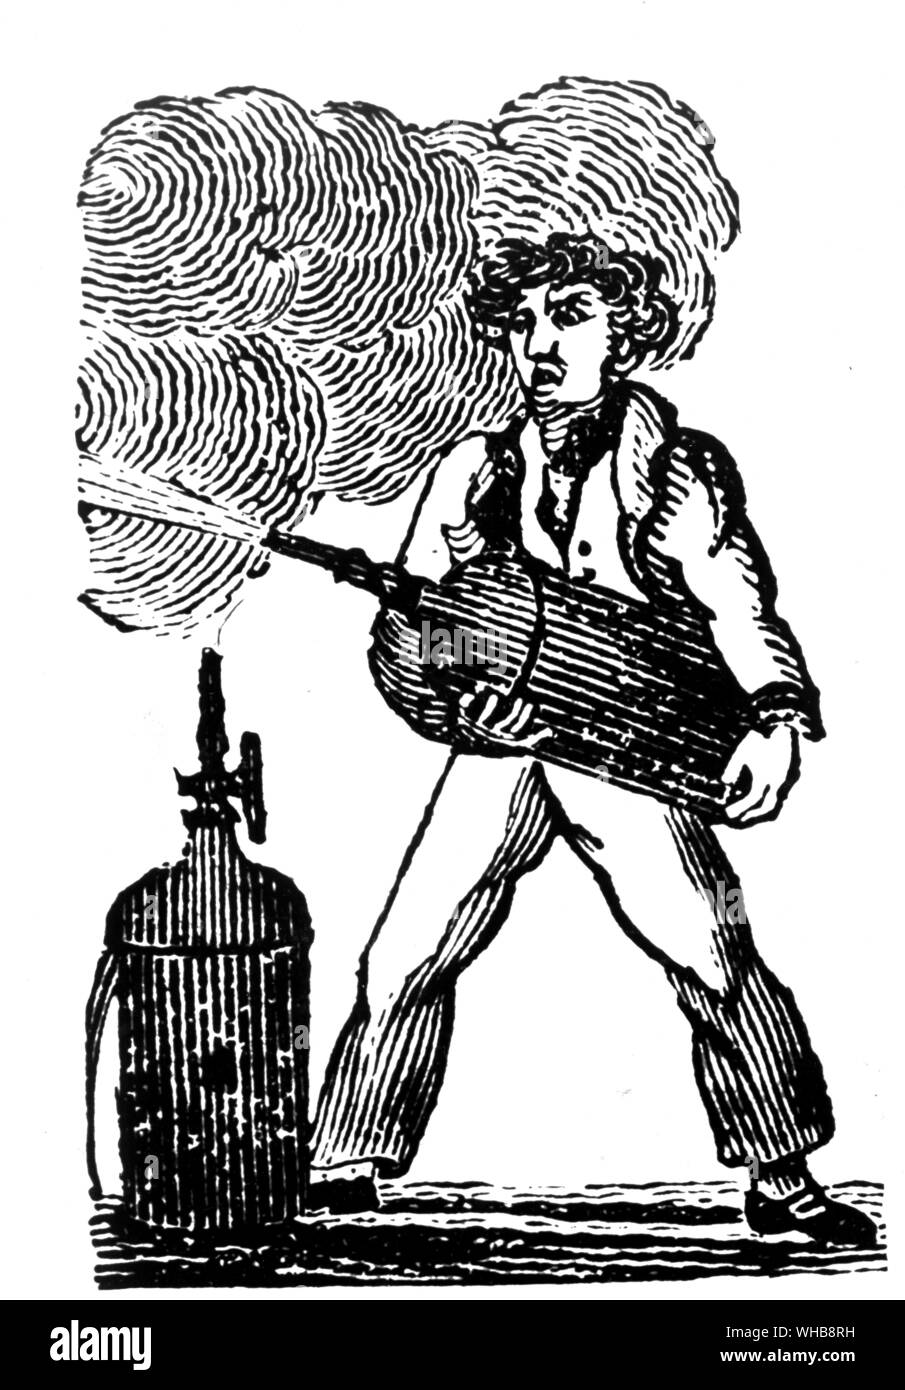 Captain Manby's invention 1816 by courtesy of the Fire Protection Association, London - Captain George William Manby (born November 28, 1765 in Denver, Norfolk, England. died November 18, 1854 in Great Yarmouth) was the inventor of a portable fire extinguisher amongst other things.. Stock Photo